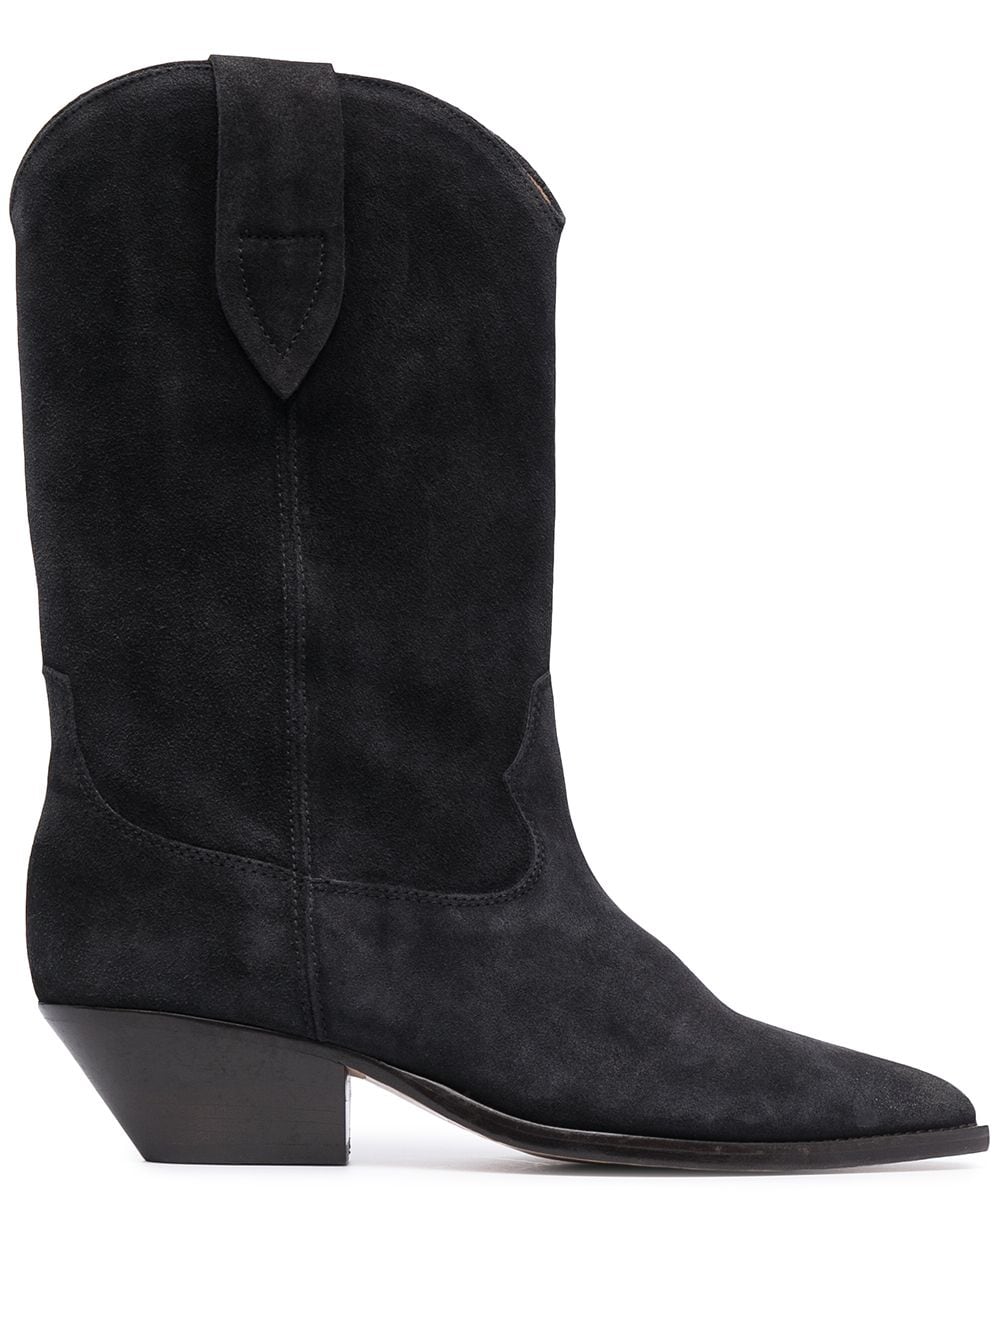 ISABEL MARANT Statement-Making Boots for a Bold Western Vibe